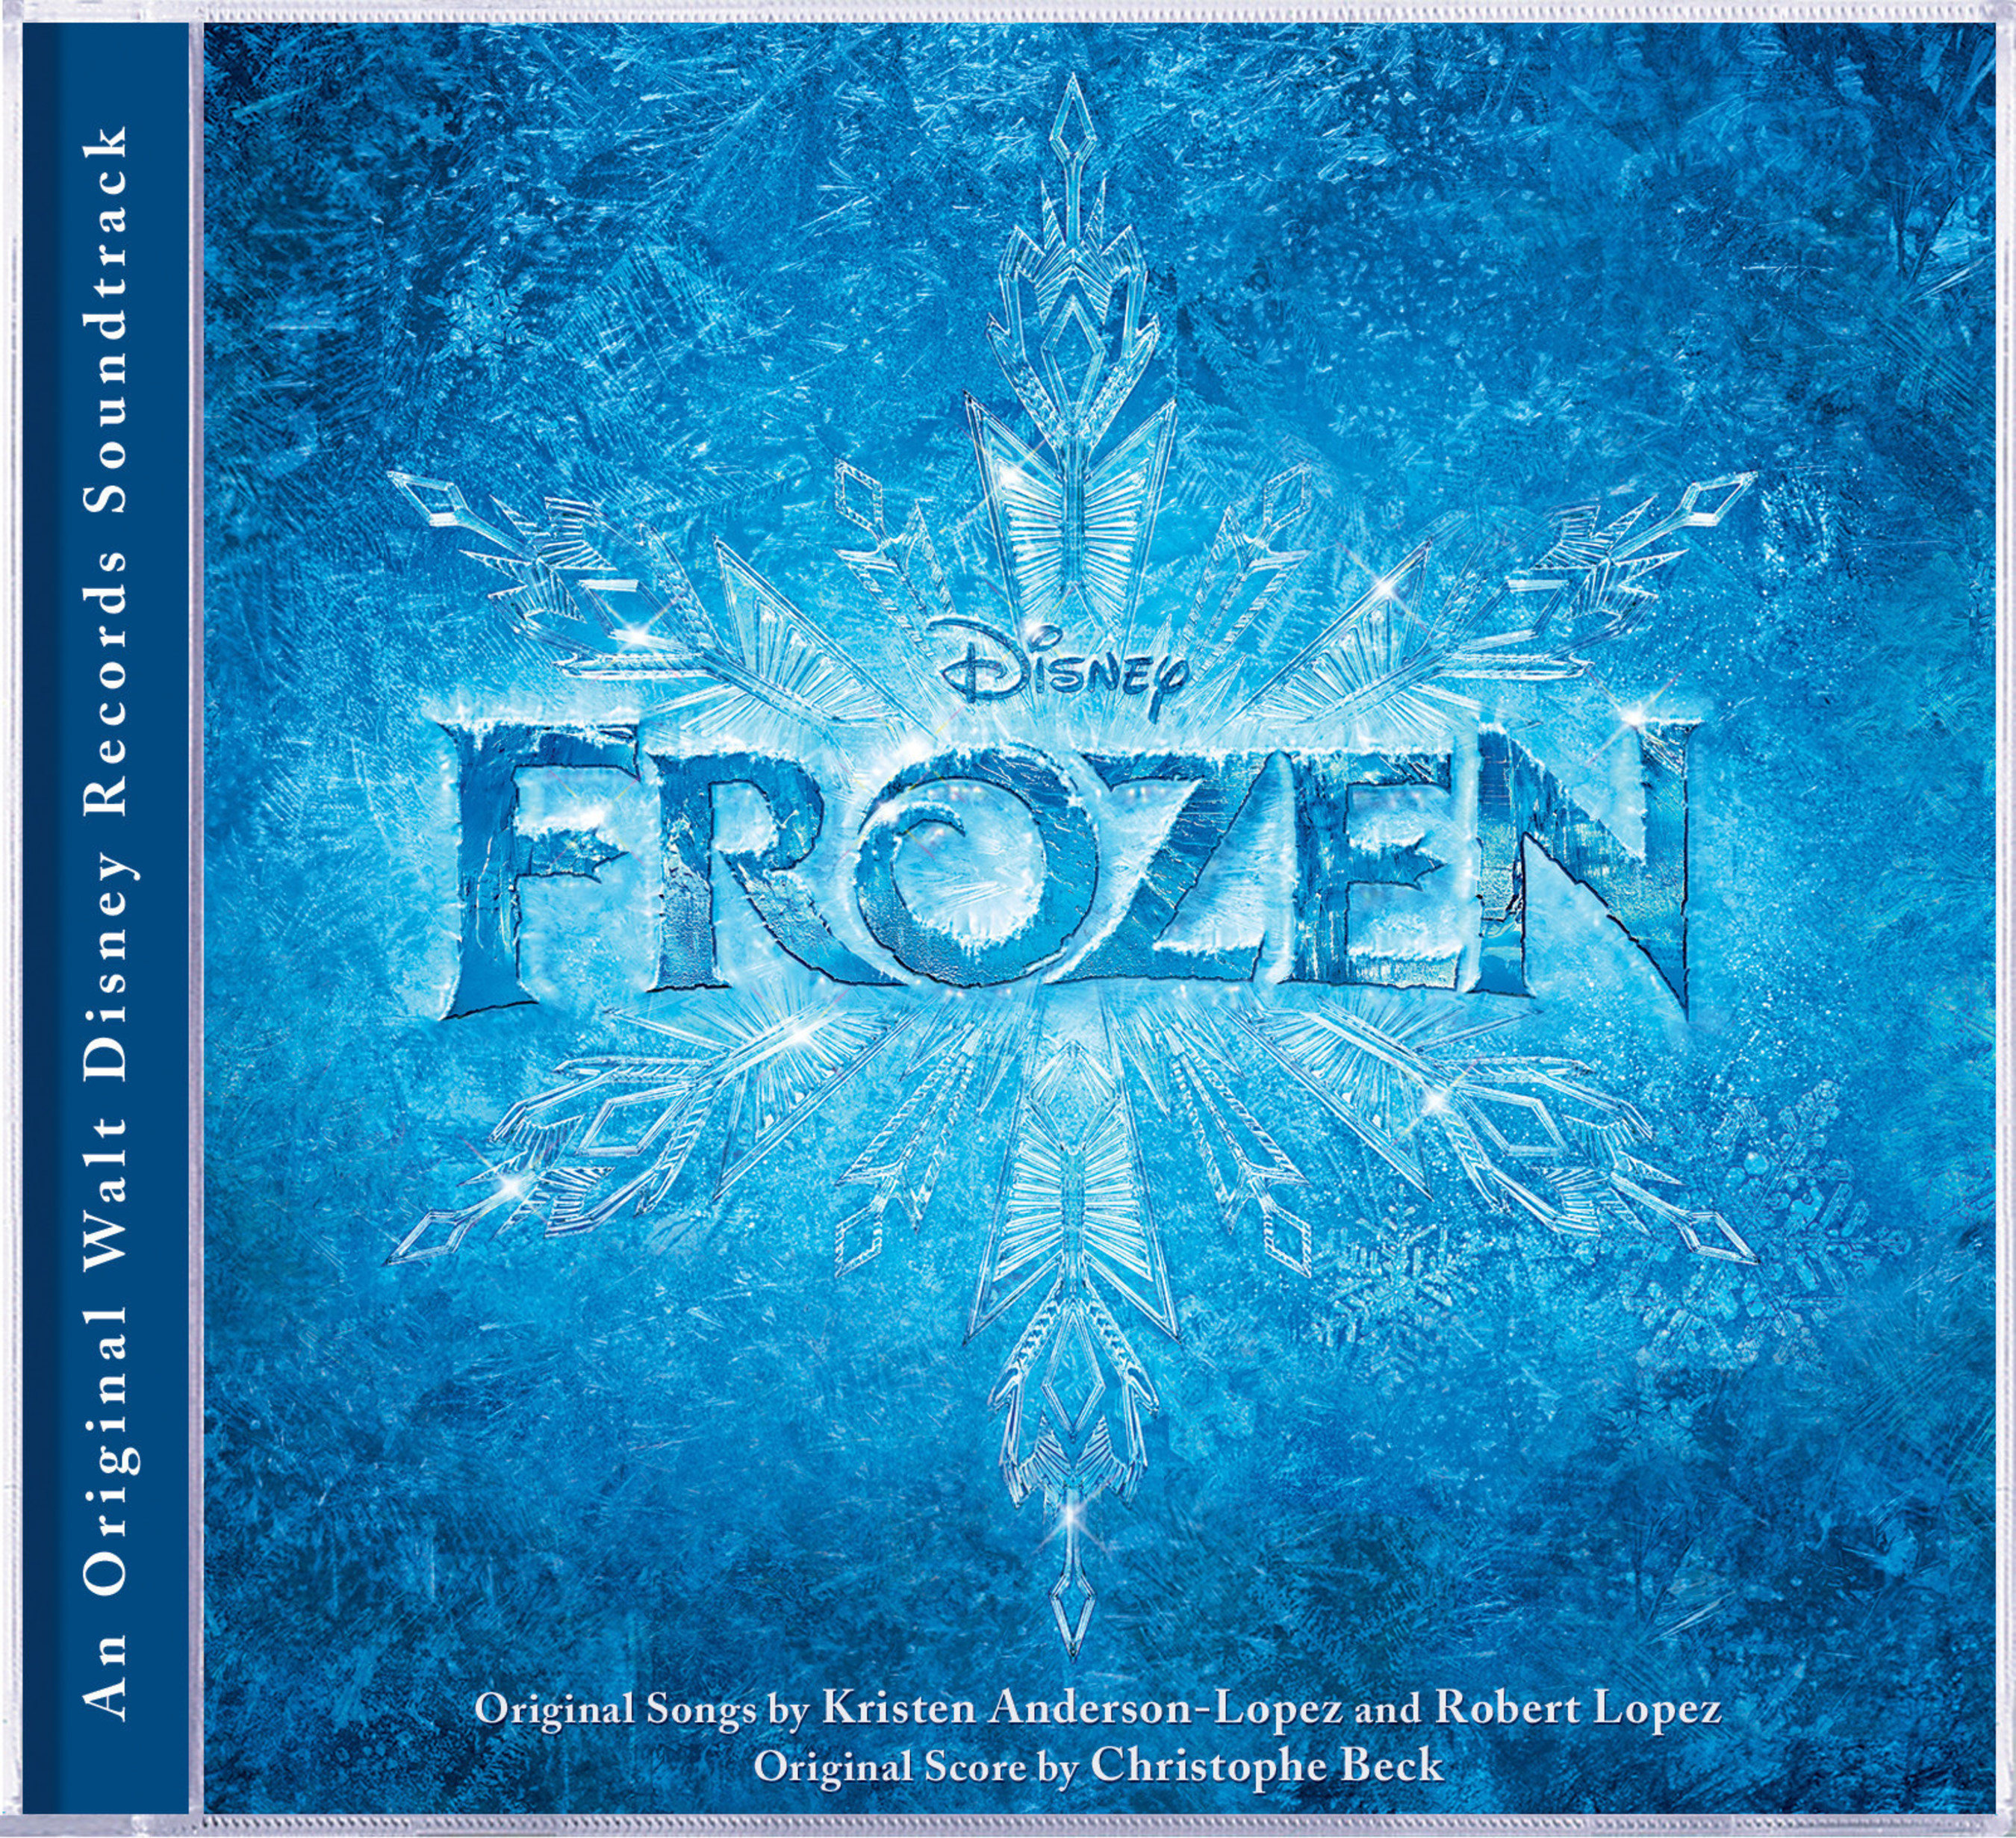 Frozen Soundtrack Ranked No. 1 Top Selling Album On The 2014 Year-End Billboard 200 Album Chart